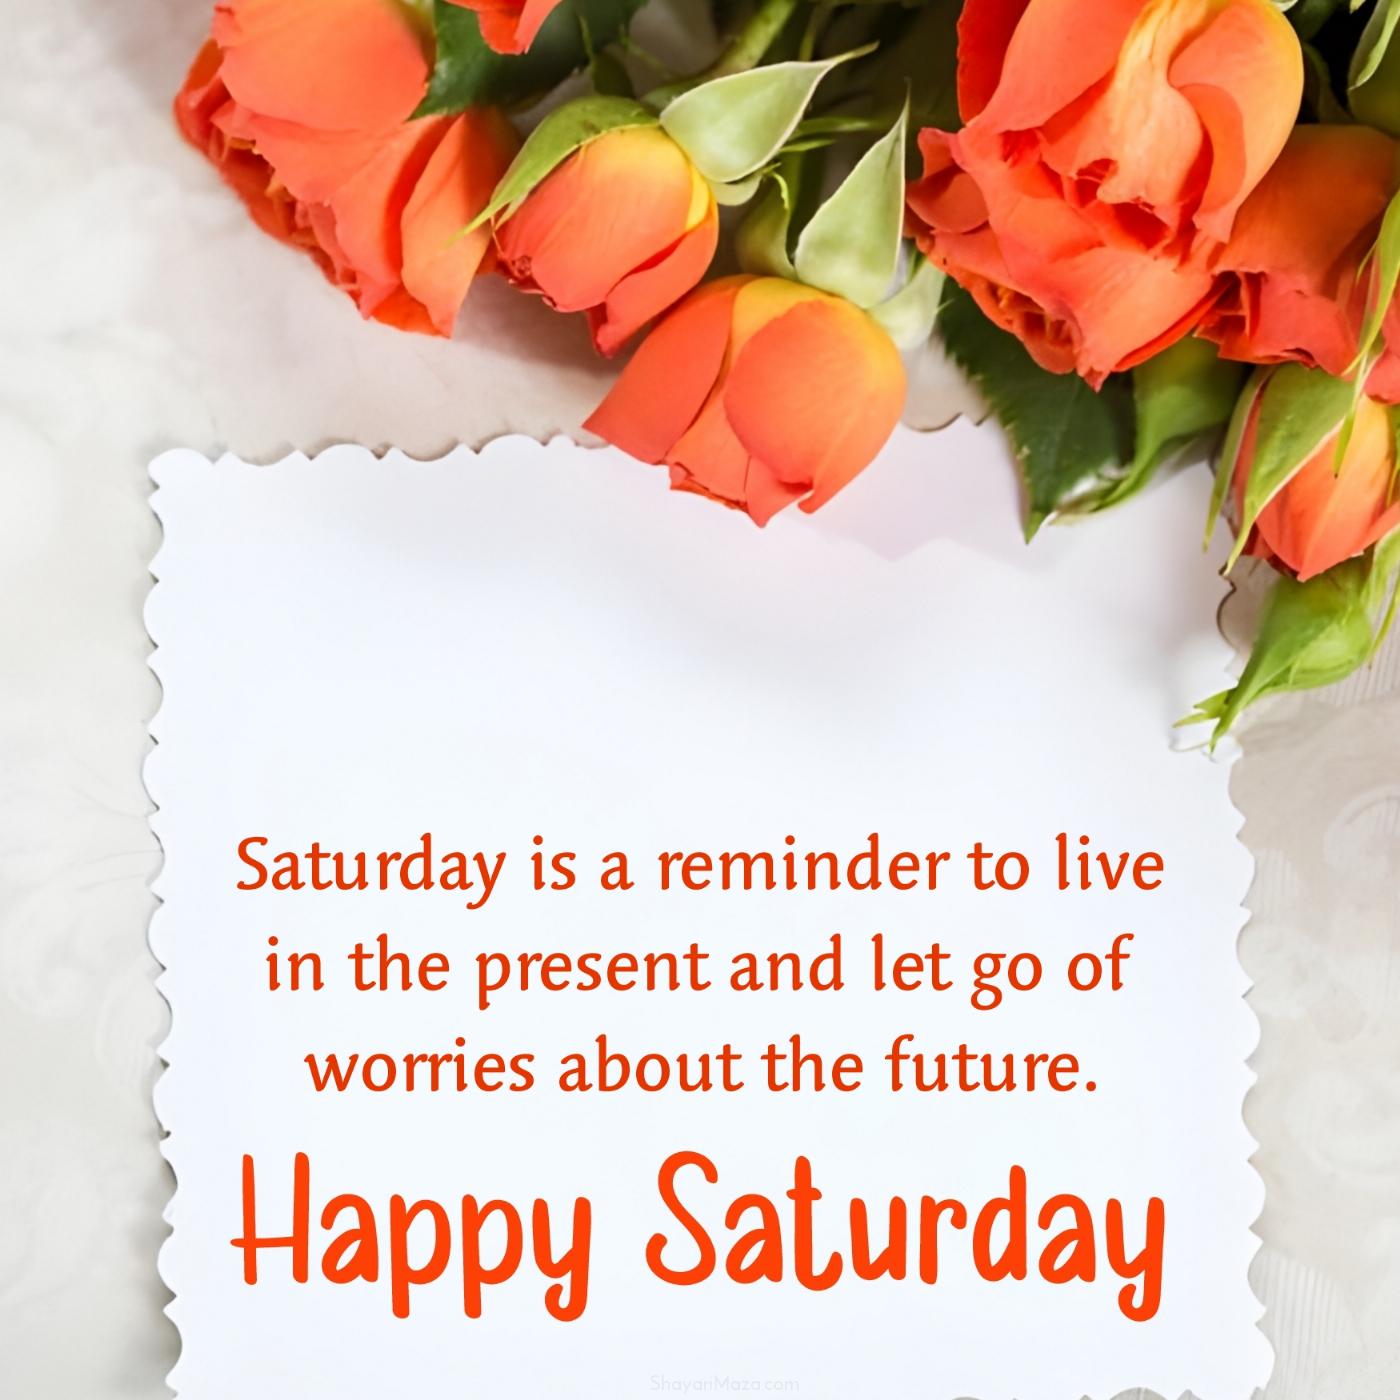 Saturday is a reminder to live in the present and let go of worries